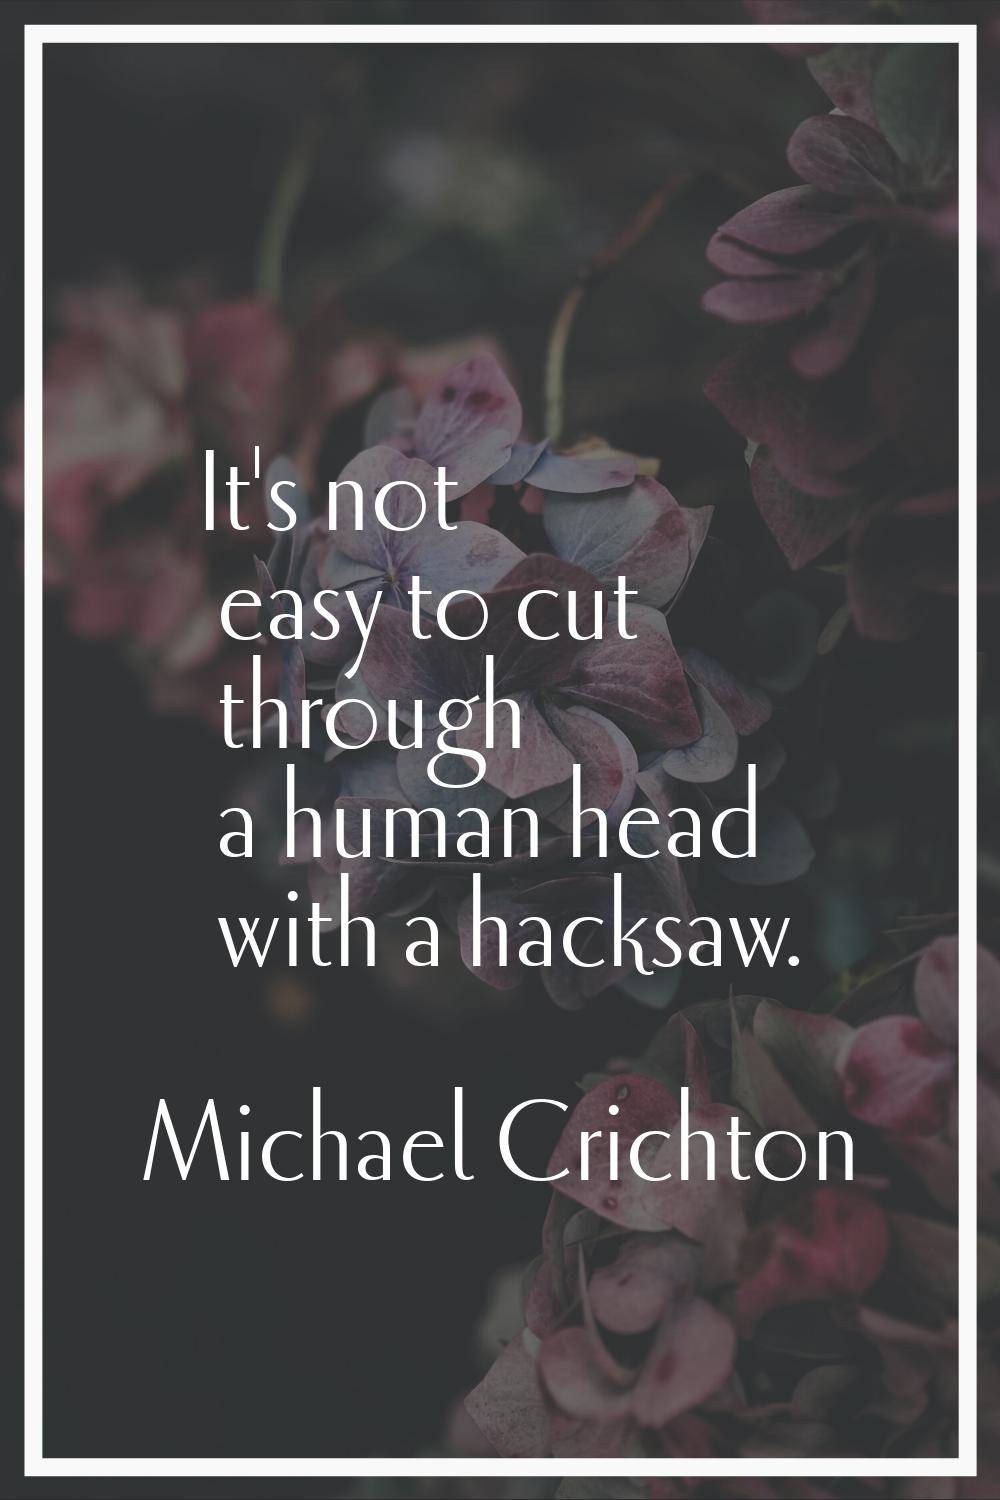 It's not easy to cut through a human head with a hacksaw.